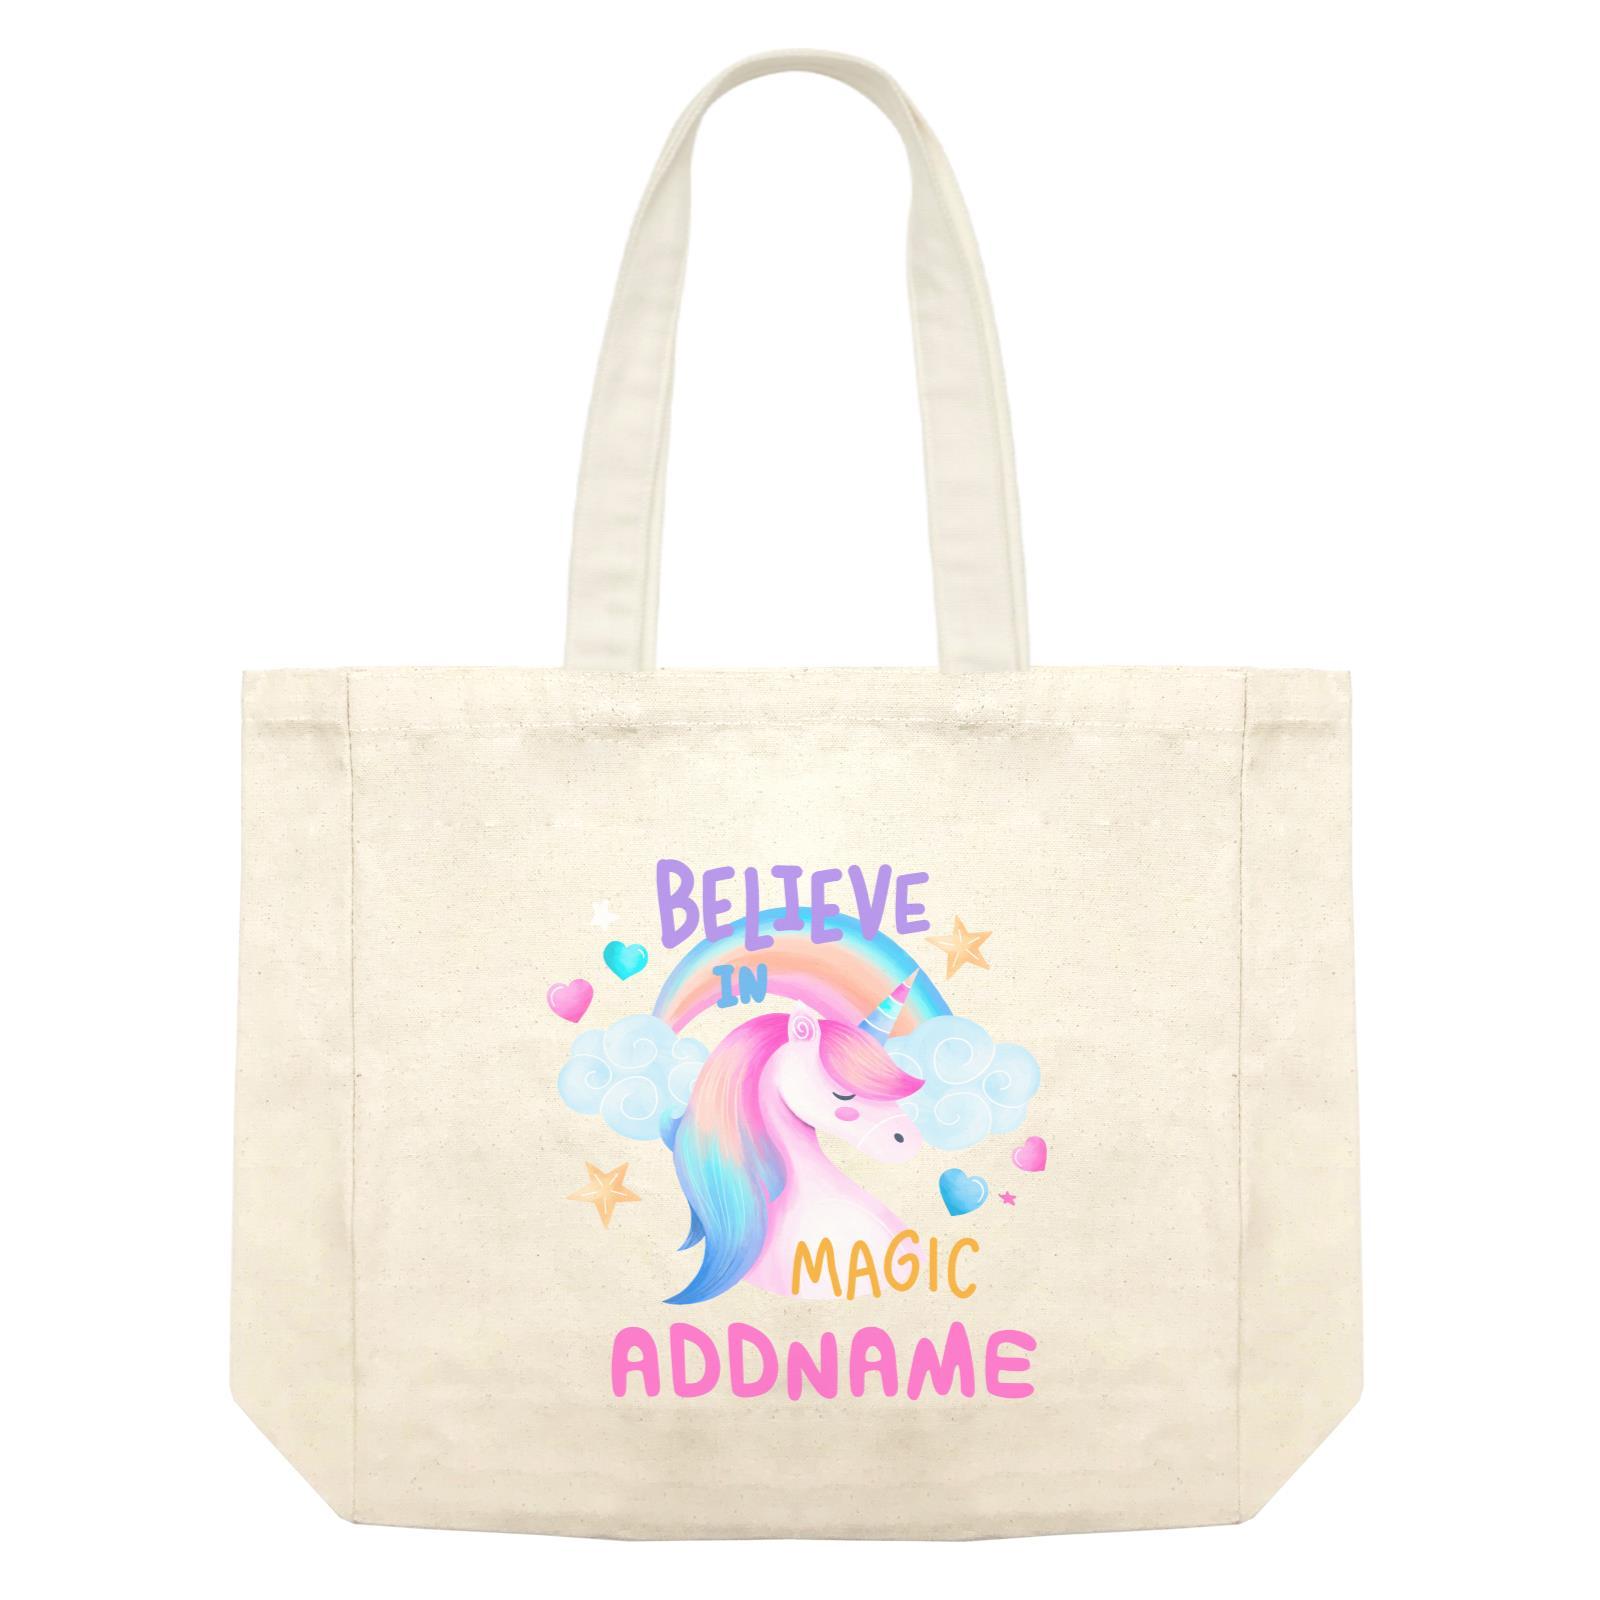 Children's Day Gift Series Believe In Magic Unicorn Addname Shopping Bag